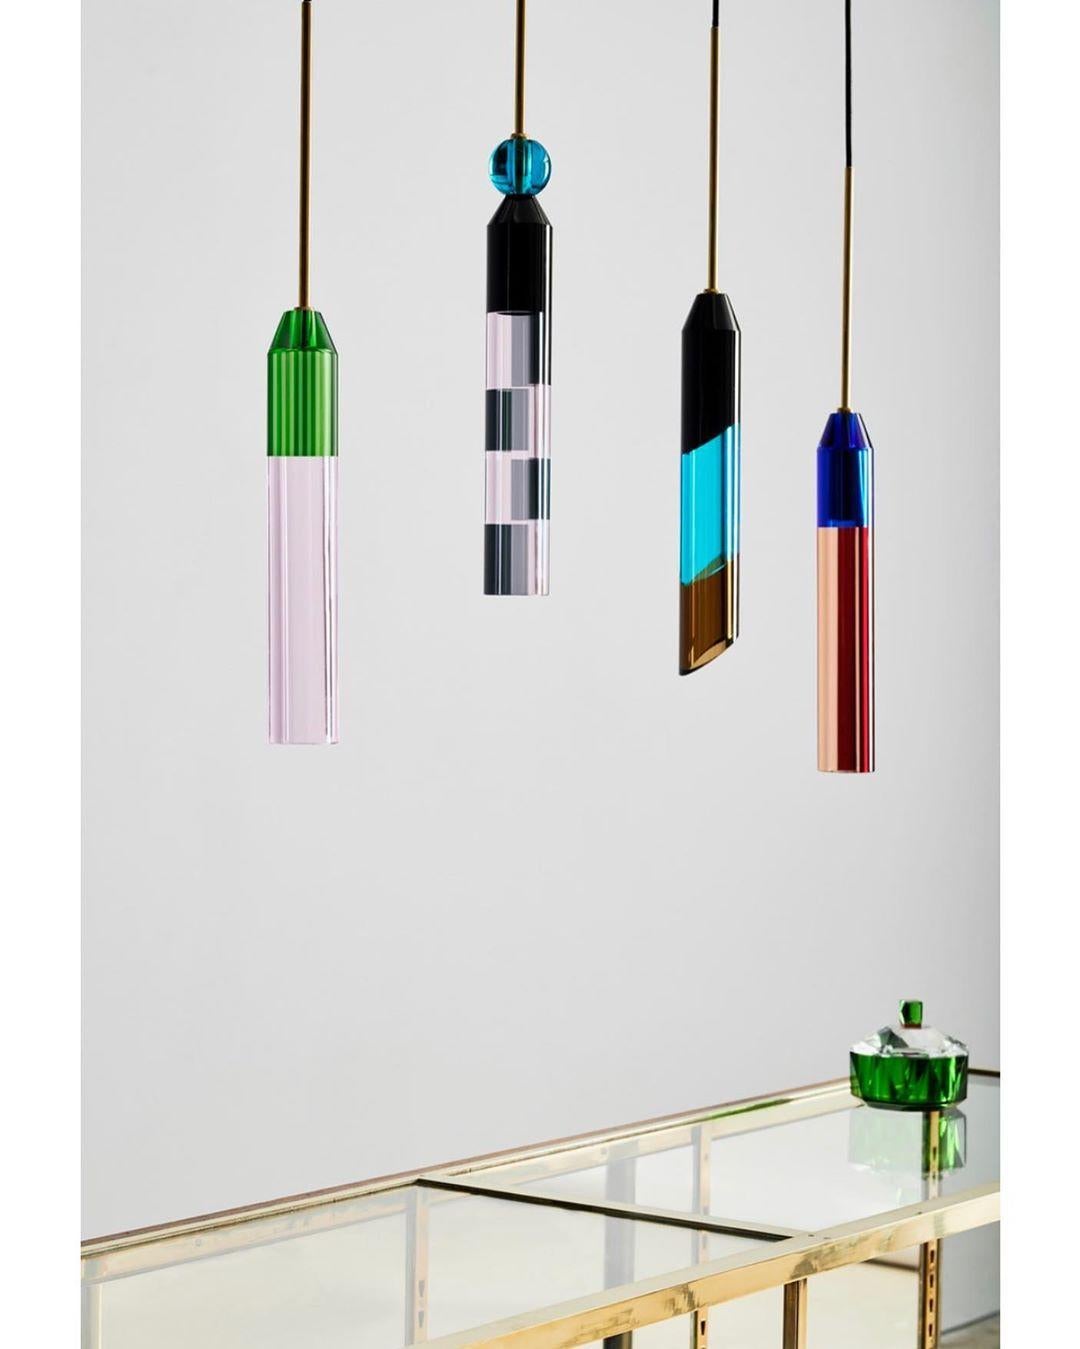 Colorful crystal pendant lamps, hand-sculpted contemporary crystal
Hand-sculpted in crystal
Measures: Height 35 cm
Width 5.8 cm
Weight 1.3 kg
Material: fine handcut crystal and brass coated iron

With blasting color combinations, a brave